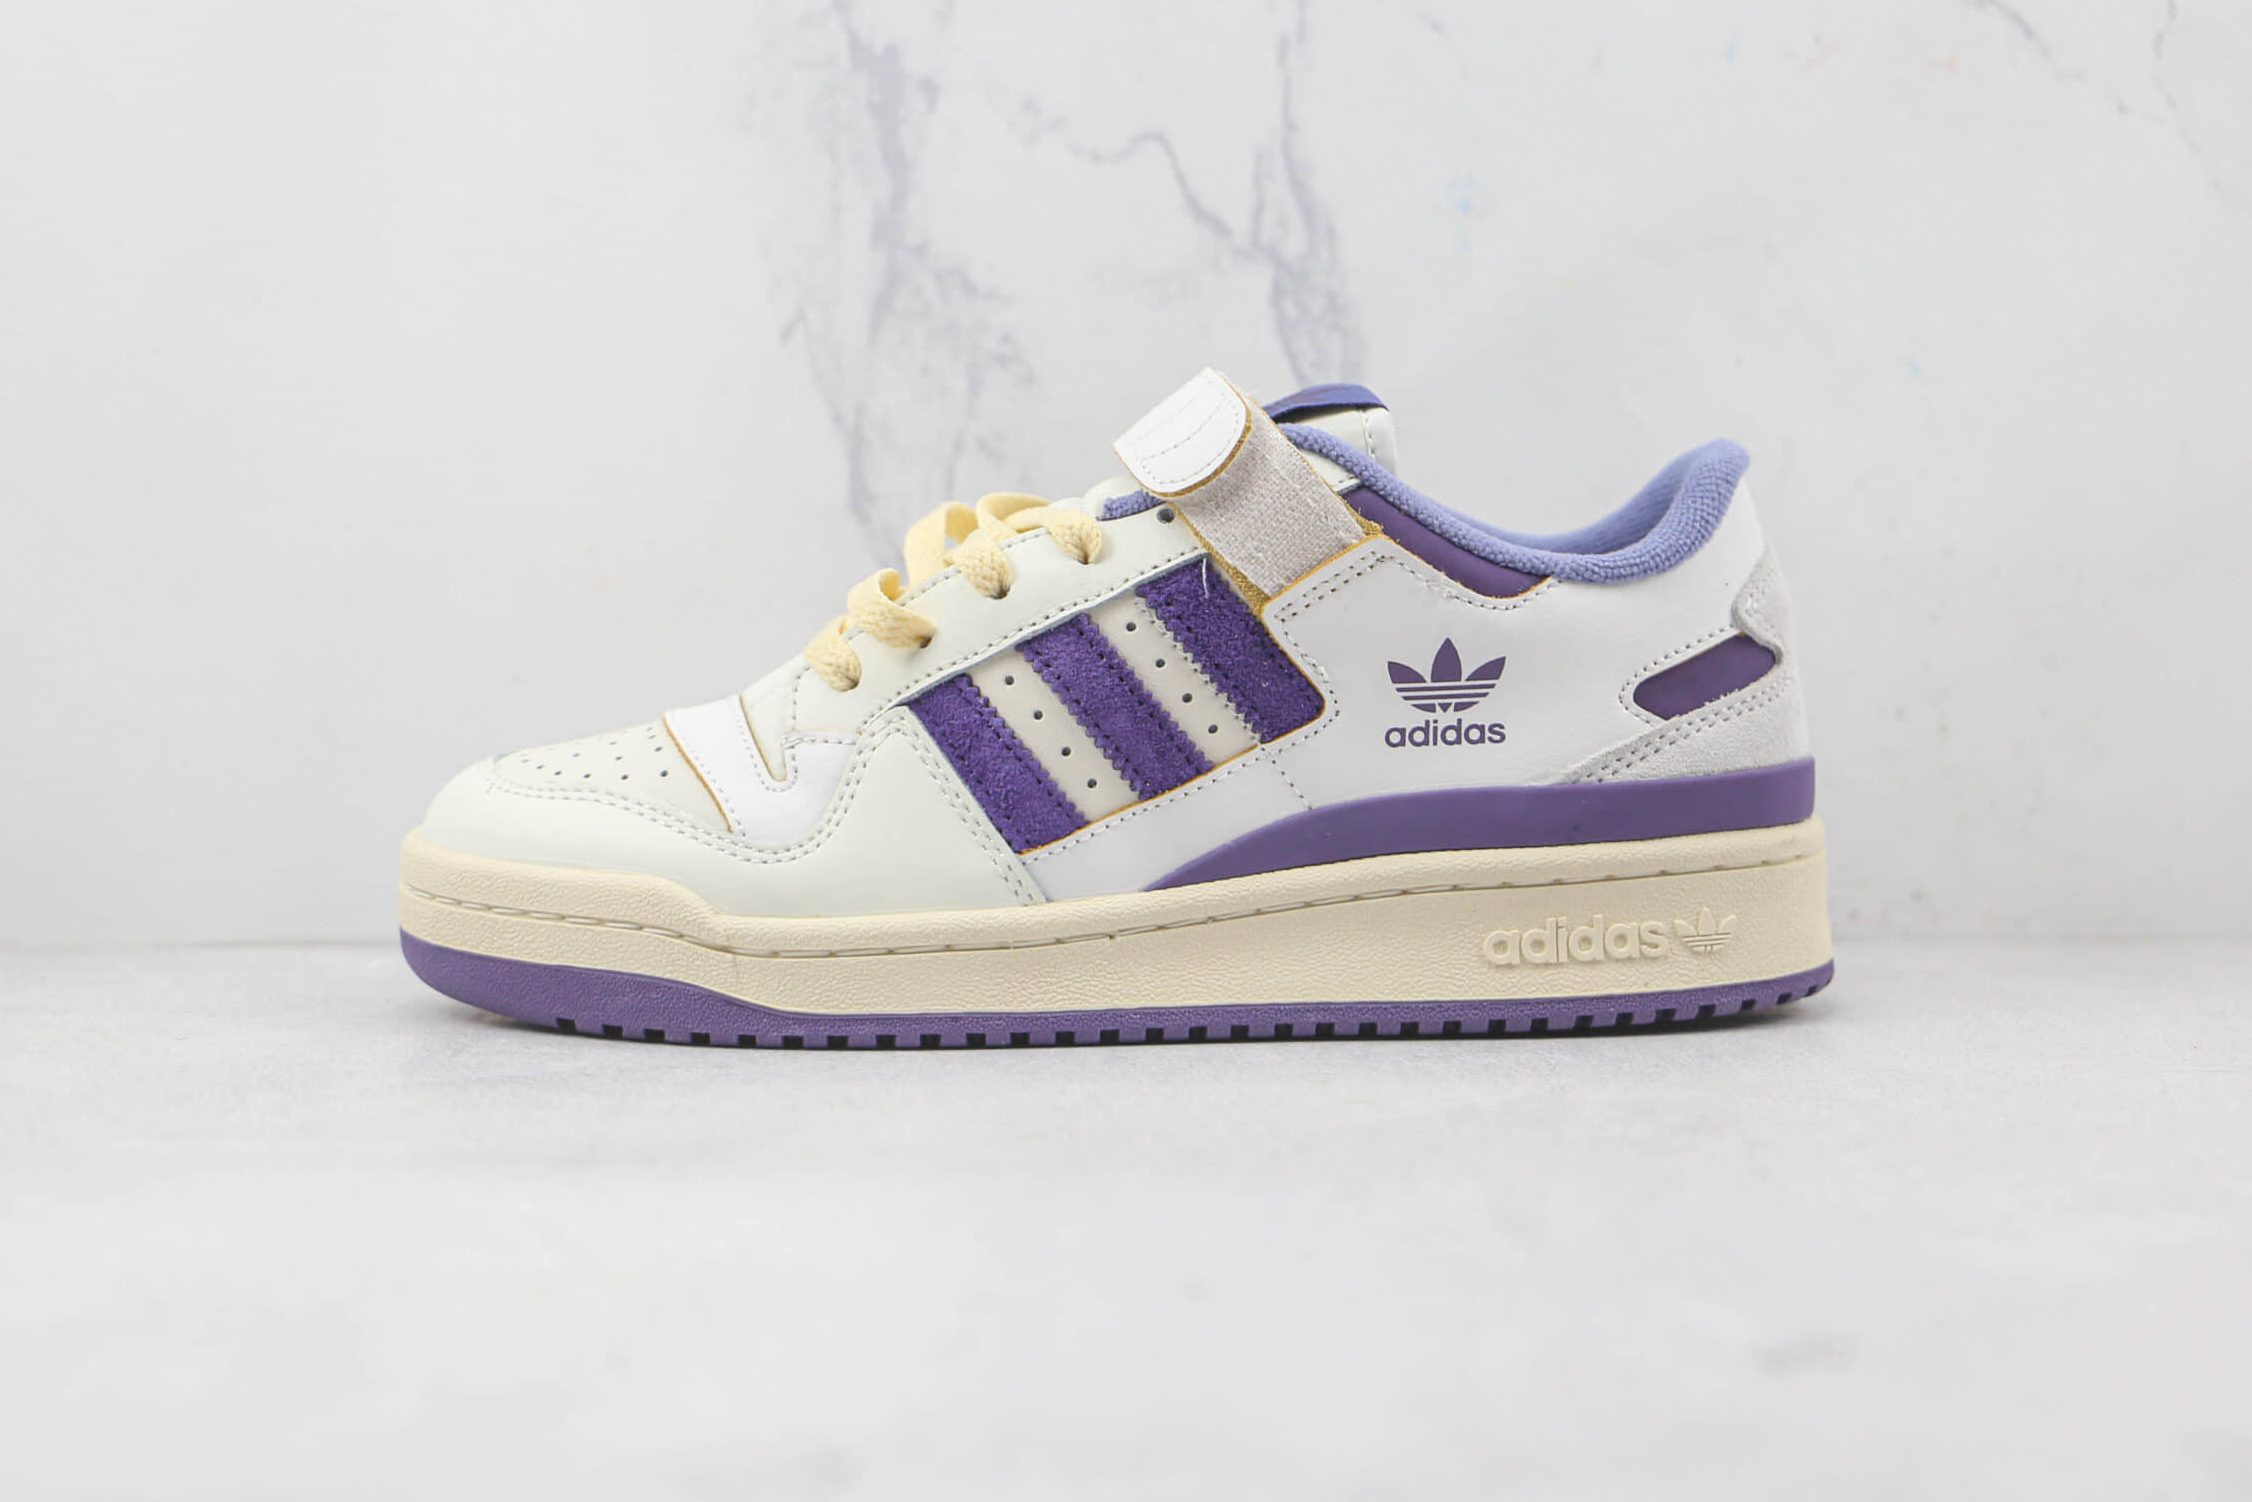 Adidas Forum 84 Low 'White College Purple' GX4535 - Sleek and stylish kicks for any occasion